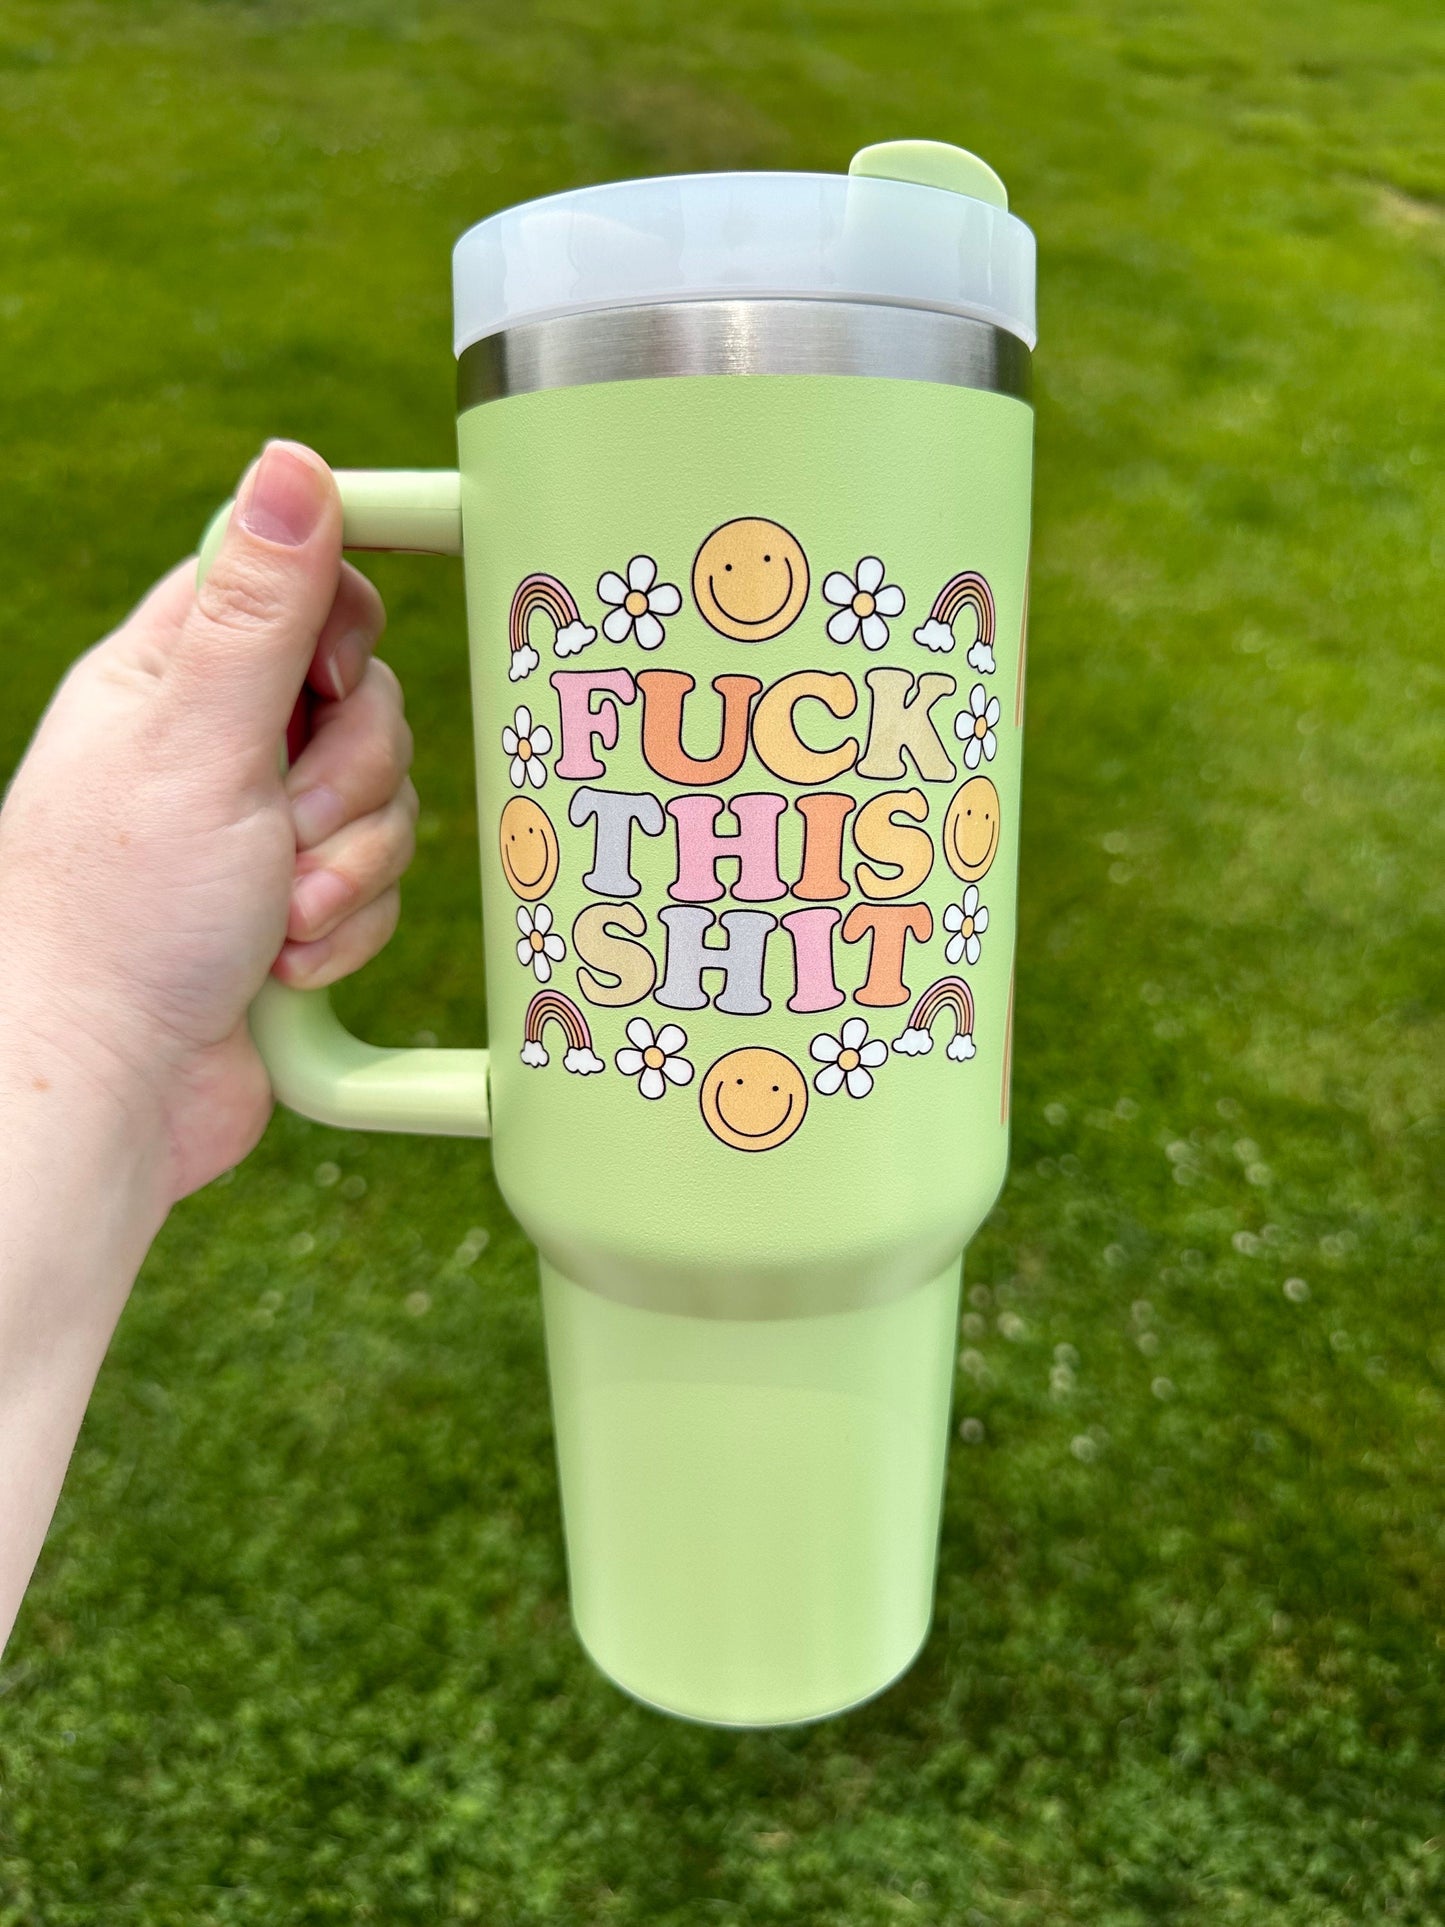 Fuck This Shit 40oz Tumbler, F This Tumbler, F This Cup, 40oz tumbler with handle and straw, stanley style tumbler, stanley style cup